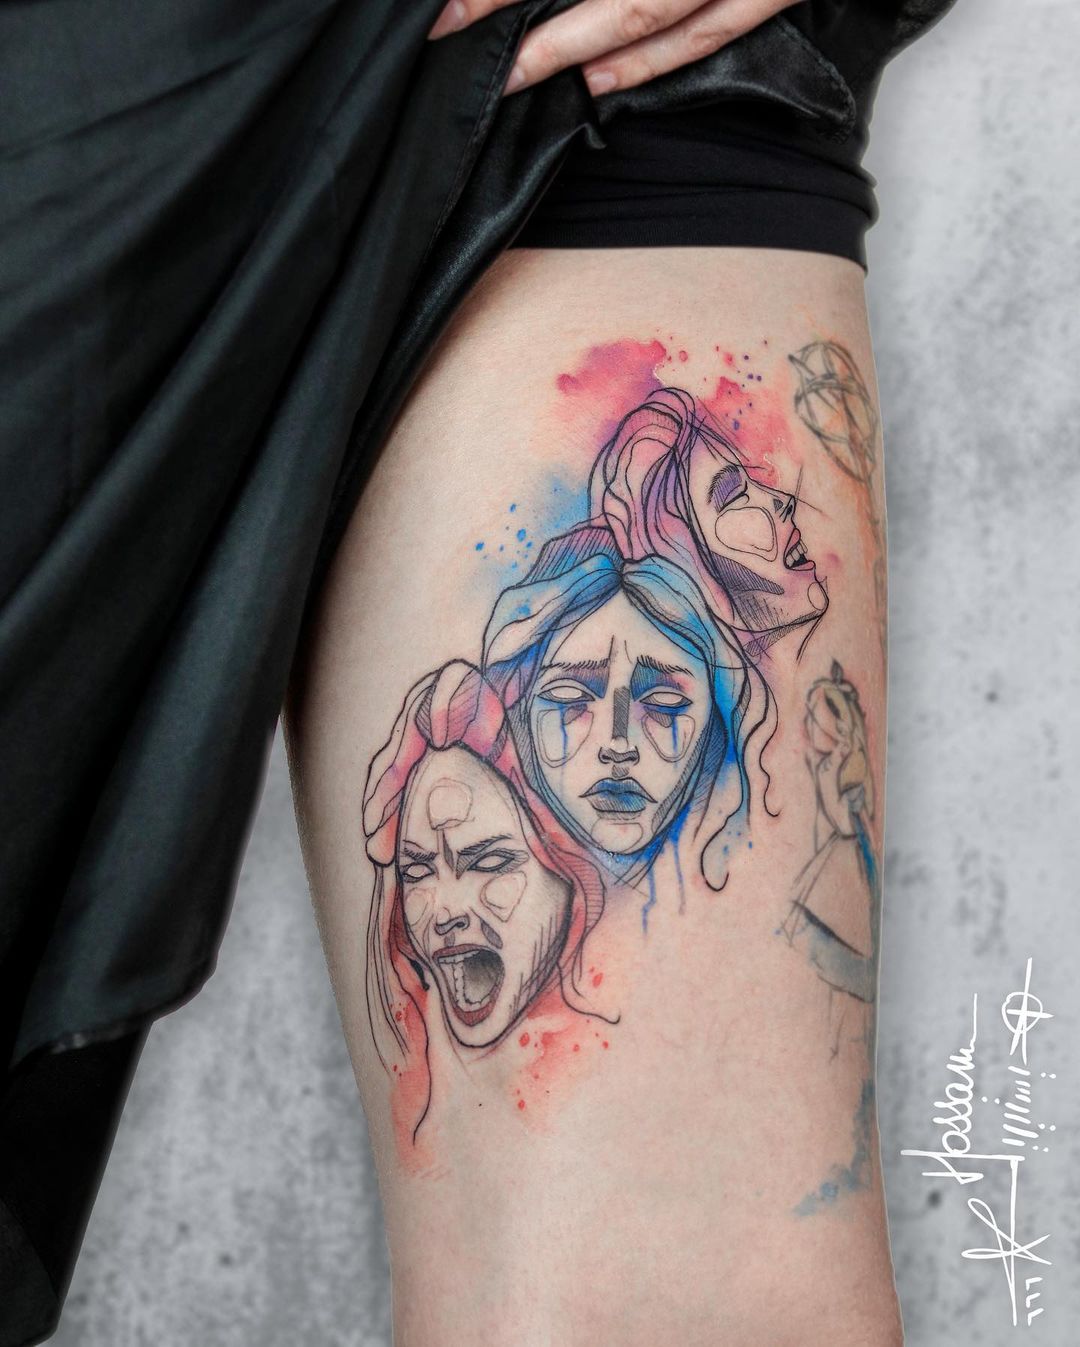 Hocus Pocus: 14 Tattoos That Fans Would Sell Their Souls To Have